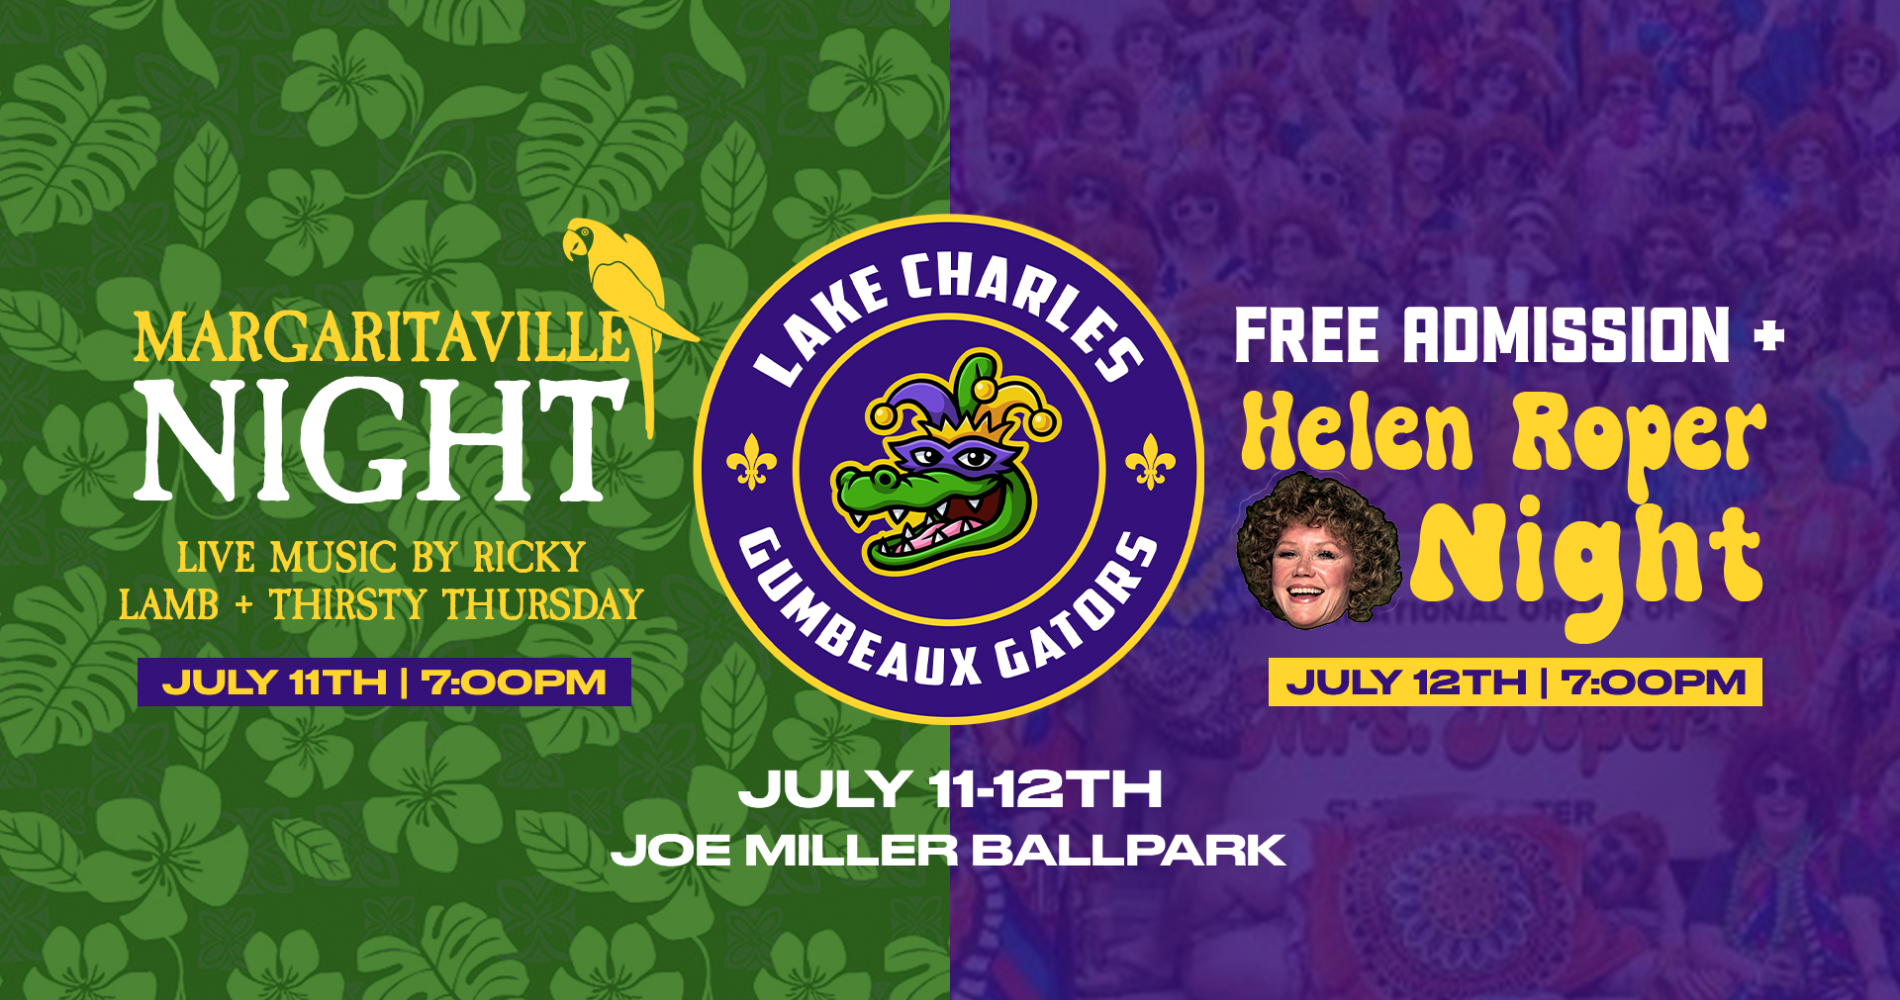 Margaritaville Night, FREE Admission, & Helen Roper Night headline the upcoming homestand on July 11-12th